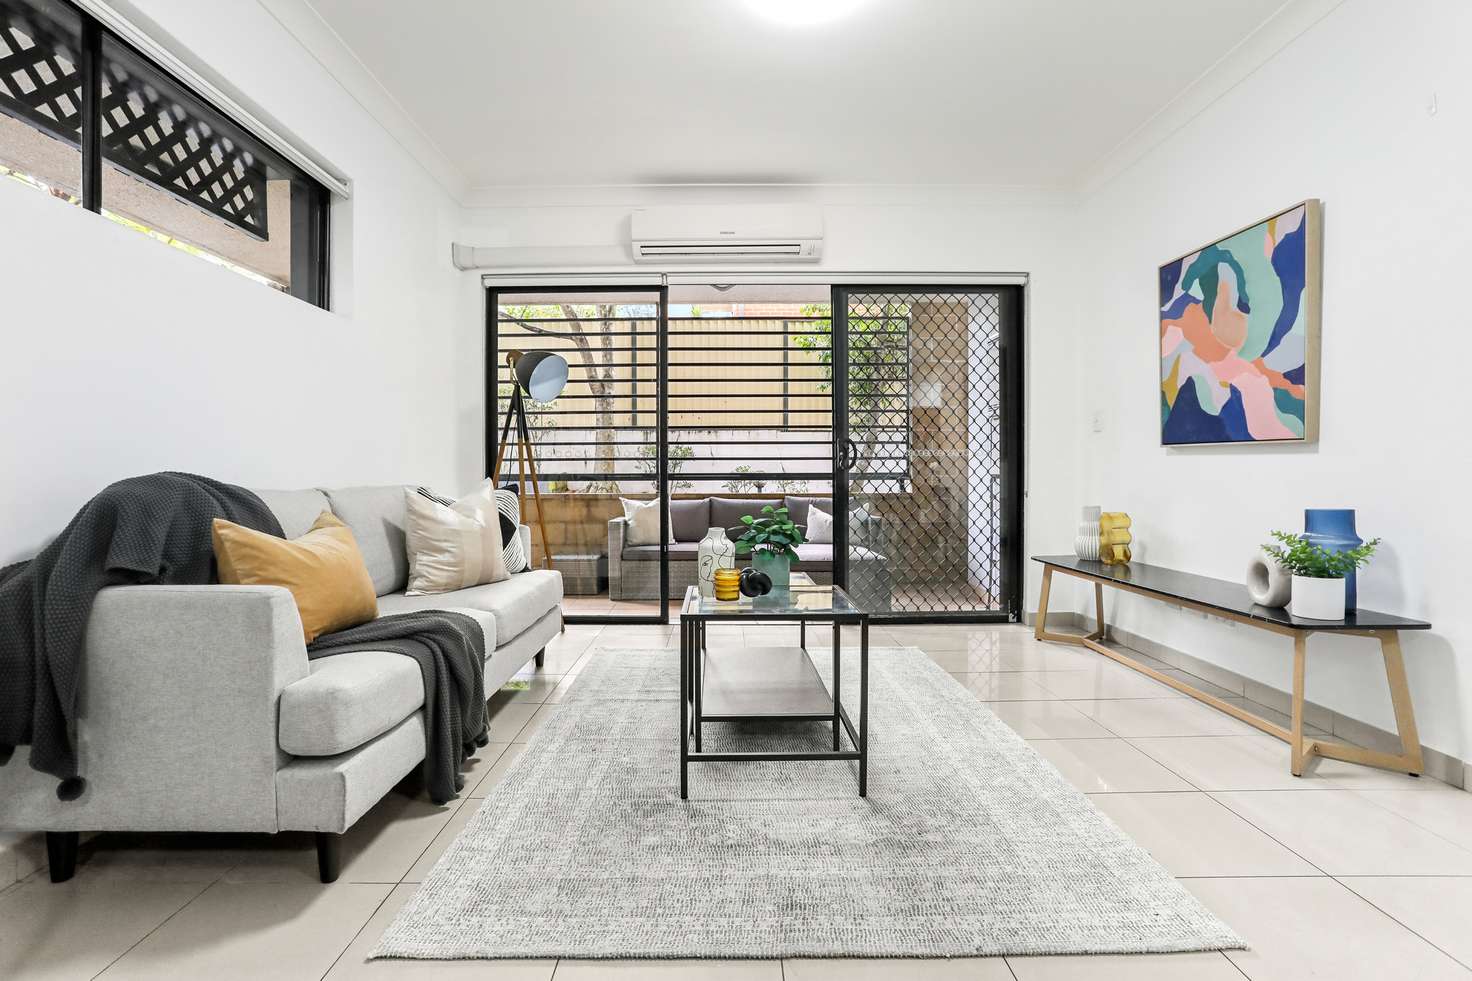 Main view of Homely apartment listing, 6/123-125 Arthur Street, Strathfield NSW 2135